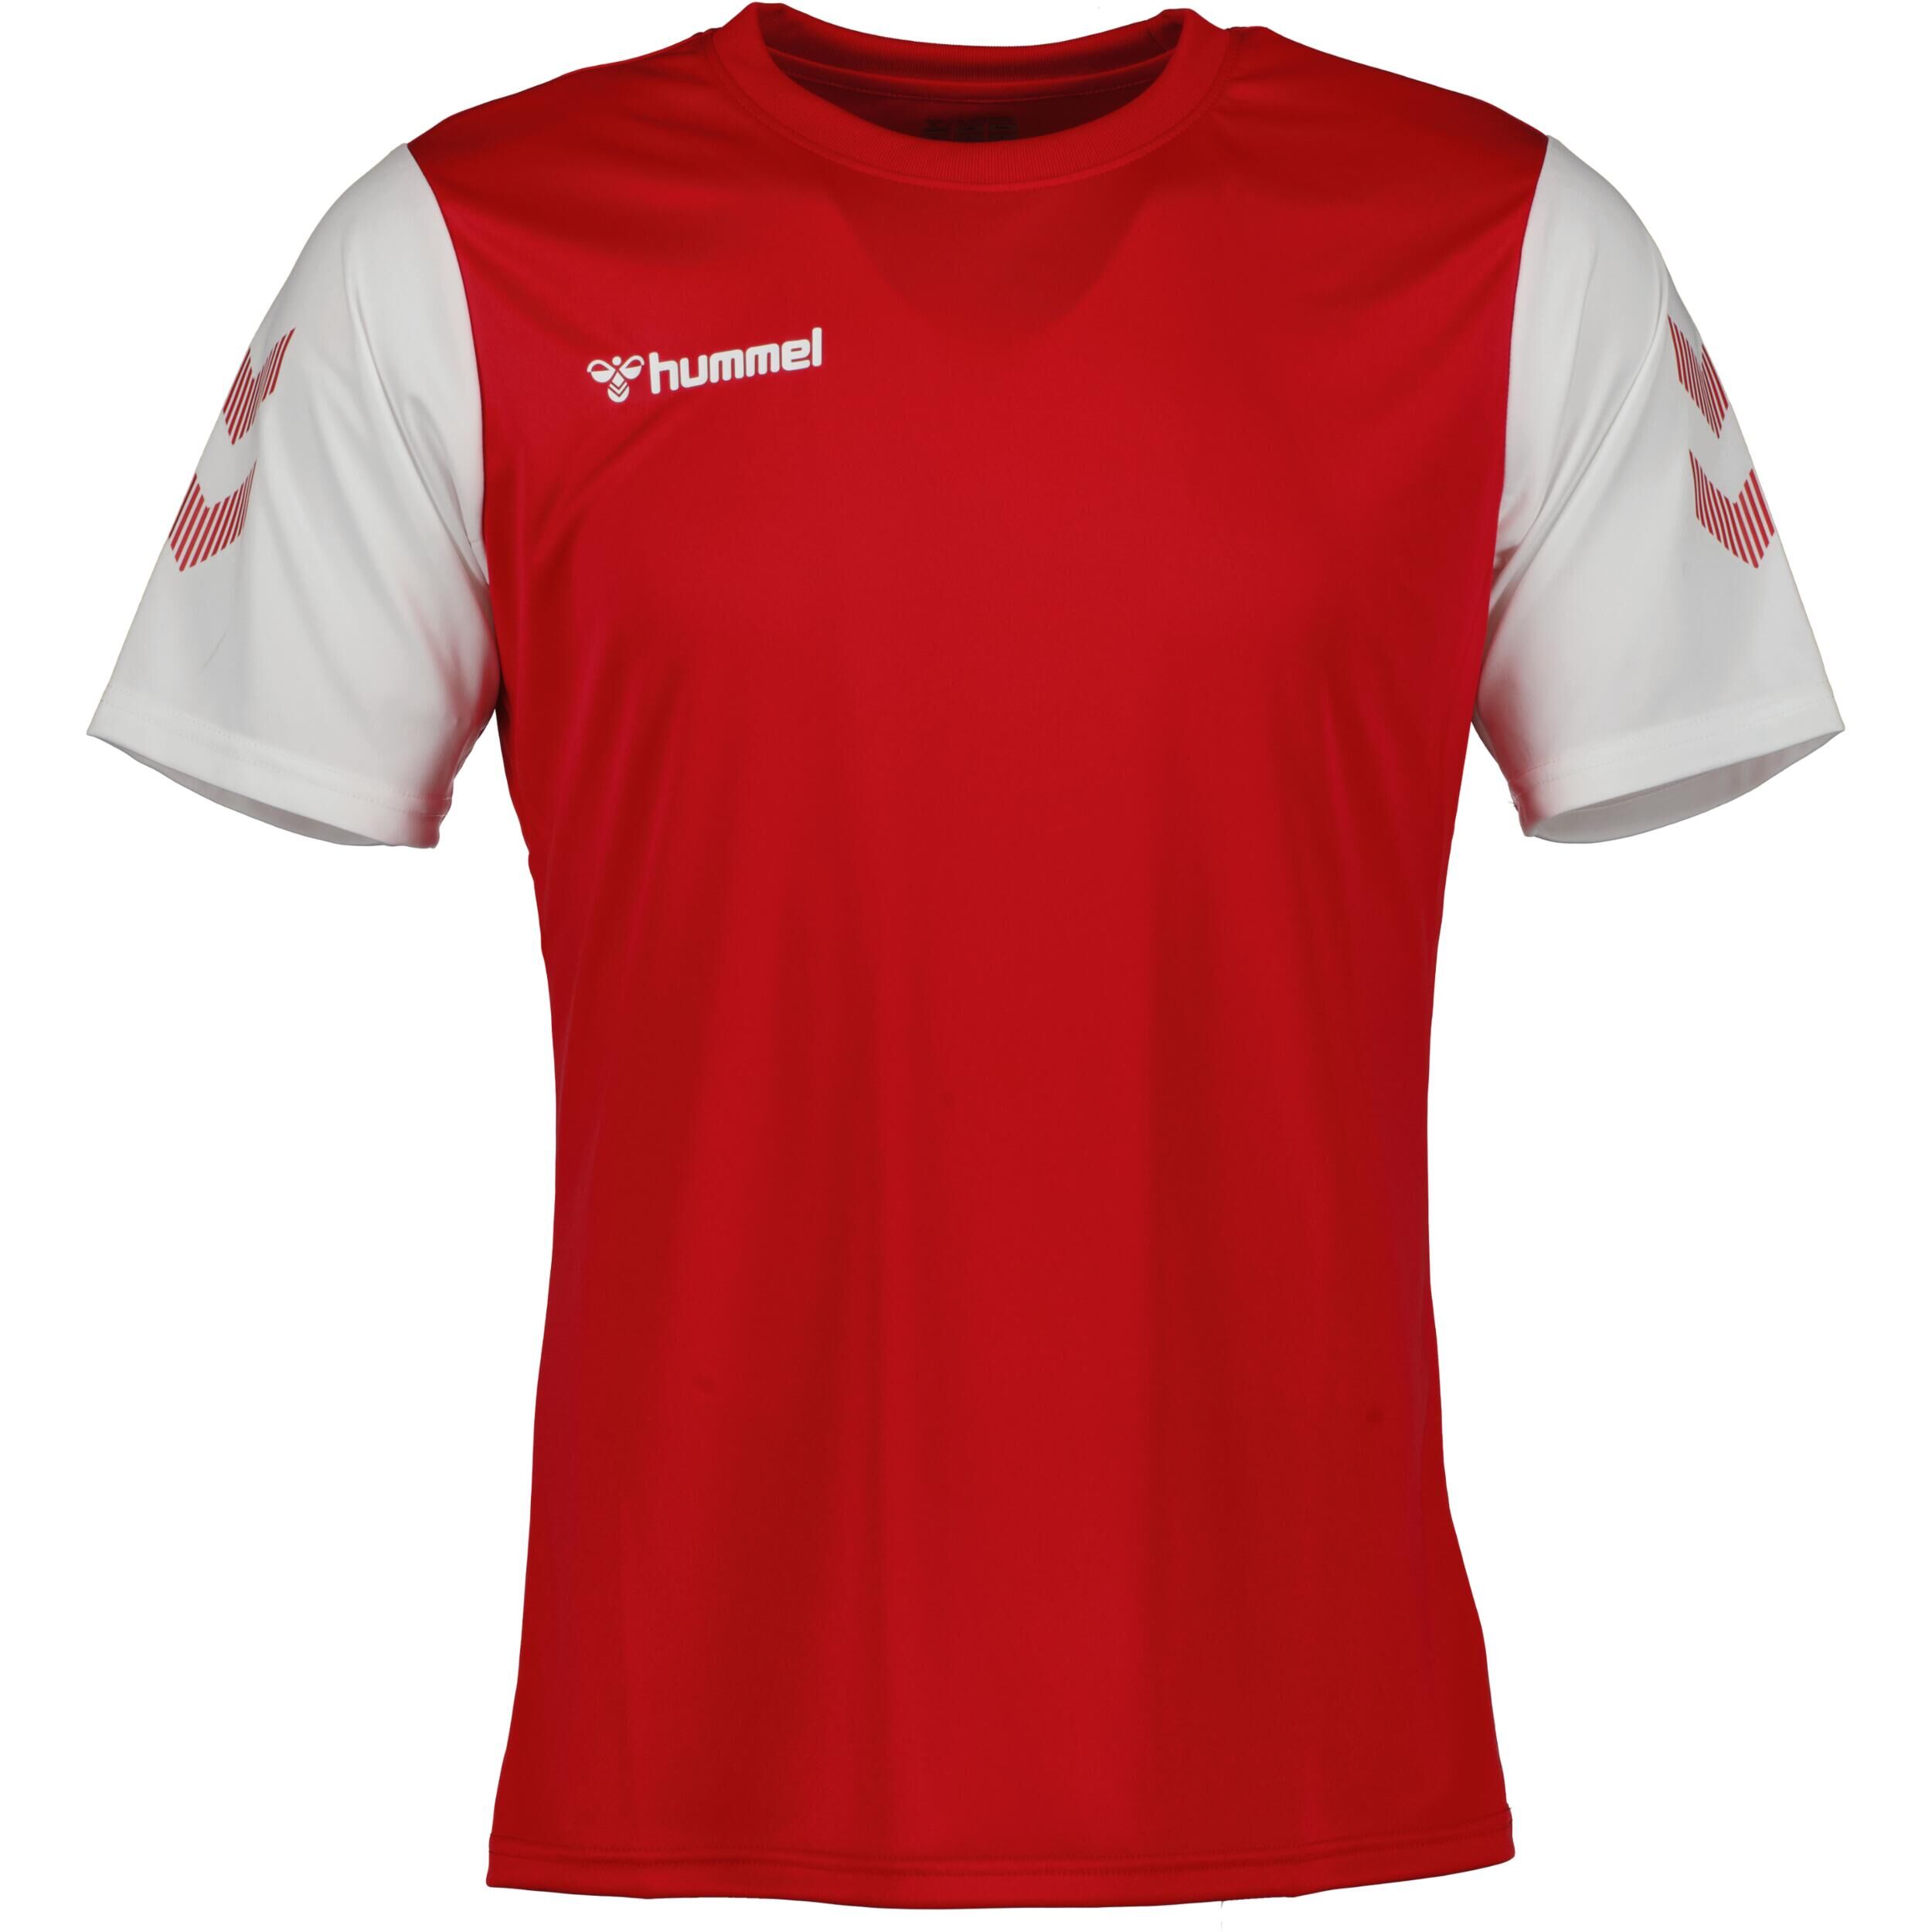 HUMMEL Match jersey for kids, great for football, in red/white